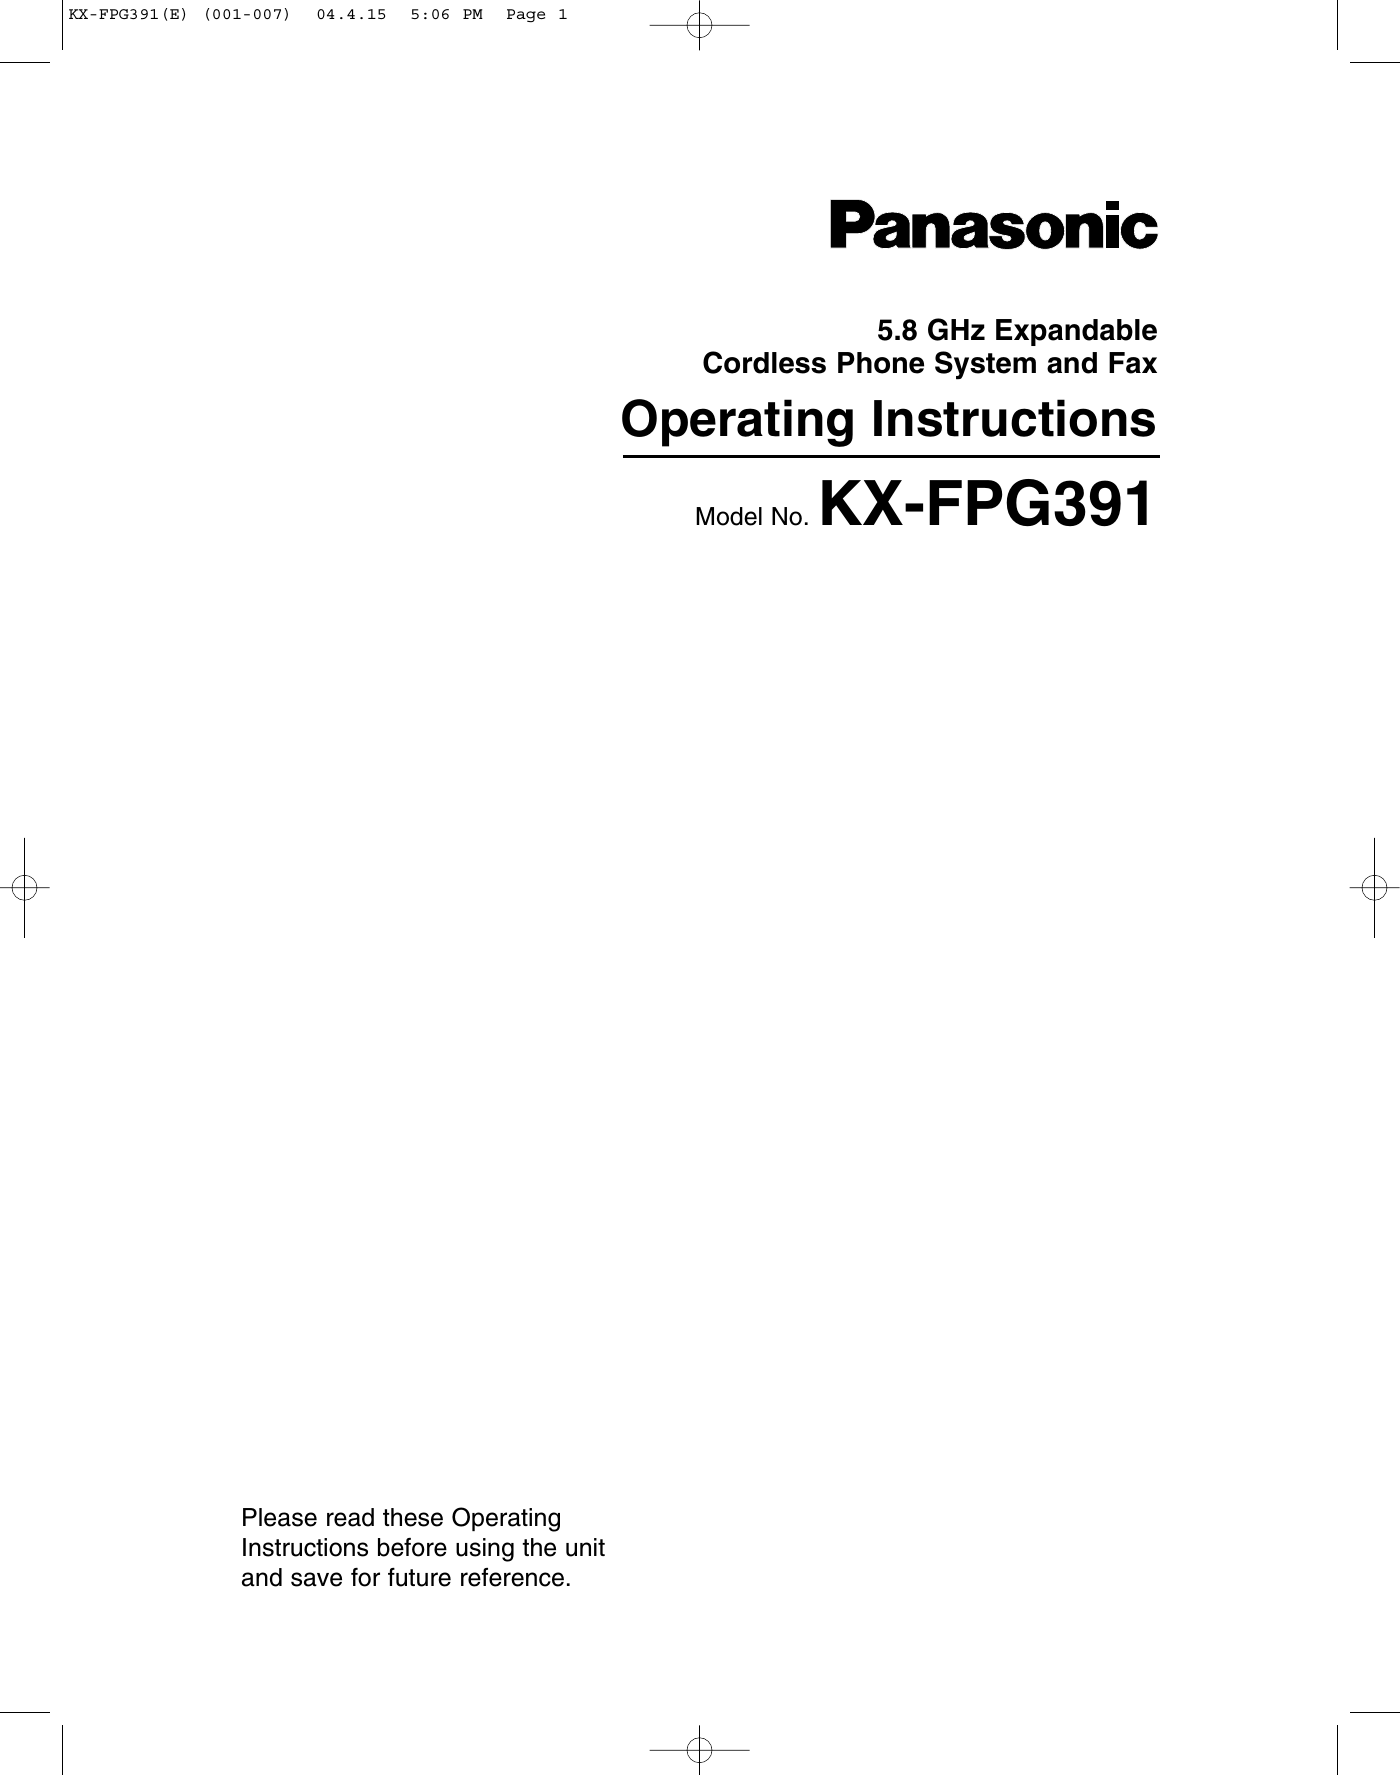 5.8 GHz ExpandableCordless Phone System and FaxOperating InstructionsModel No. KX-FPG391Please read these OperatingInstructions before using the unitand save for future reference.KX-FPG391(E) (001-007)  04.4.15  5:06 PM  Page 1